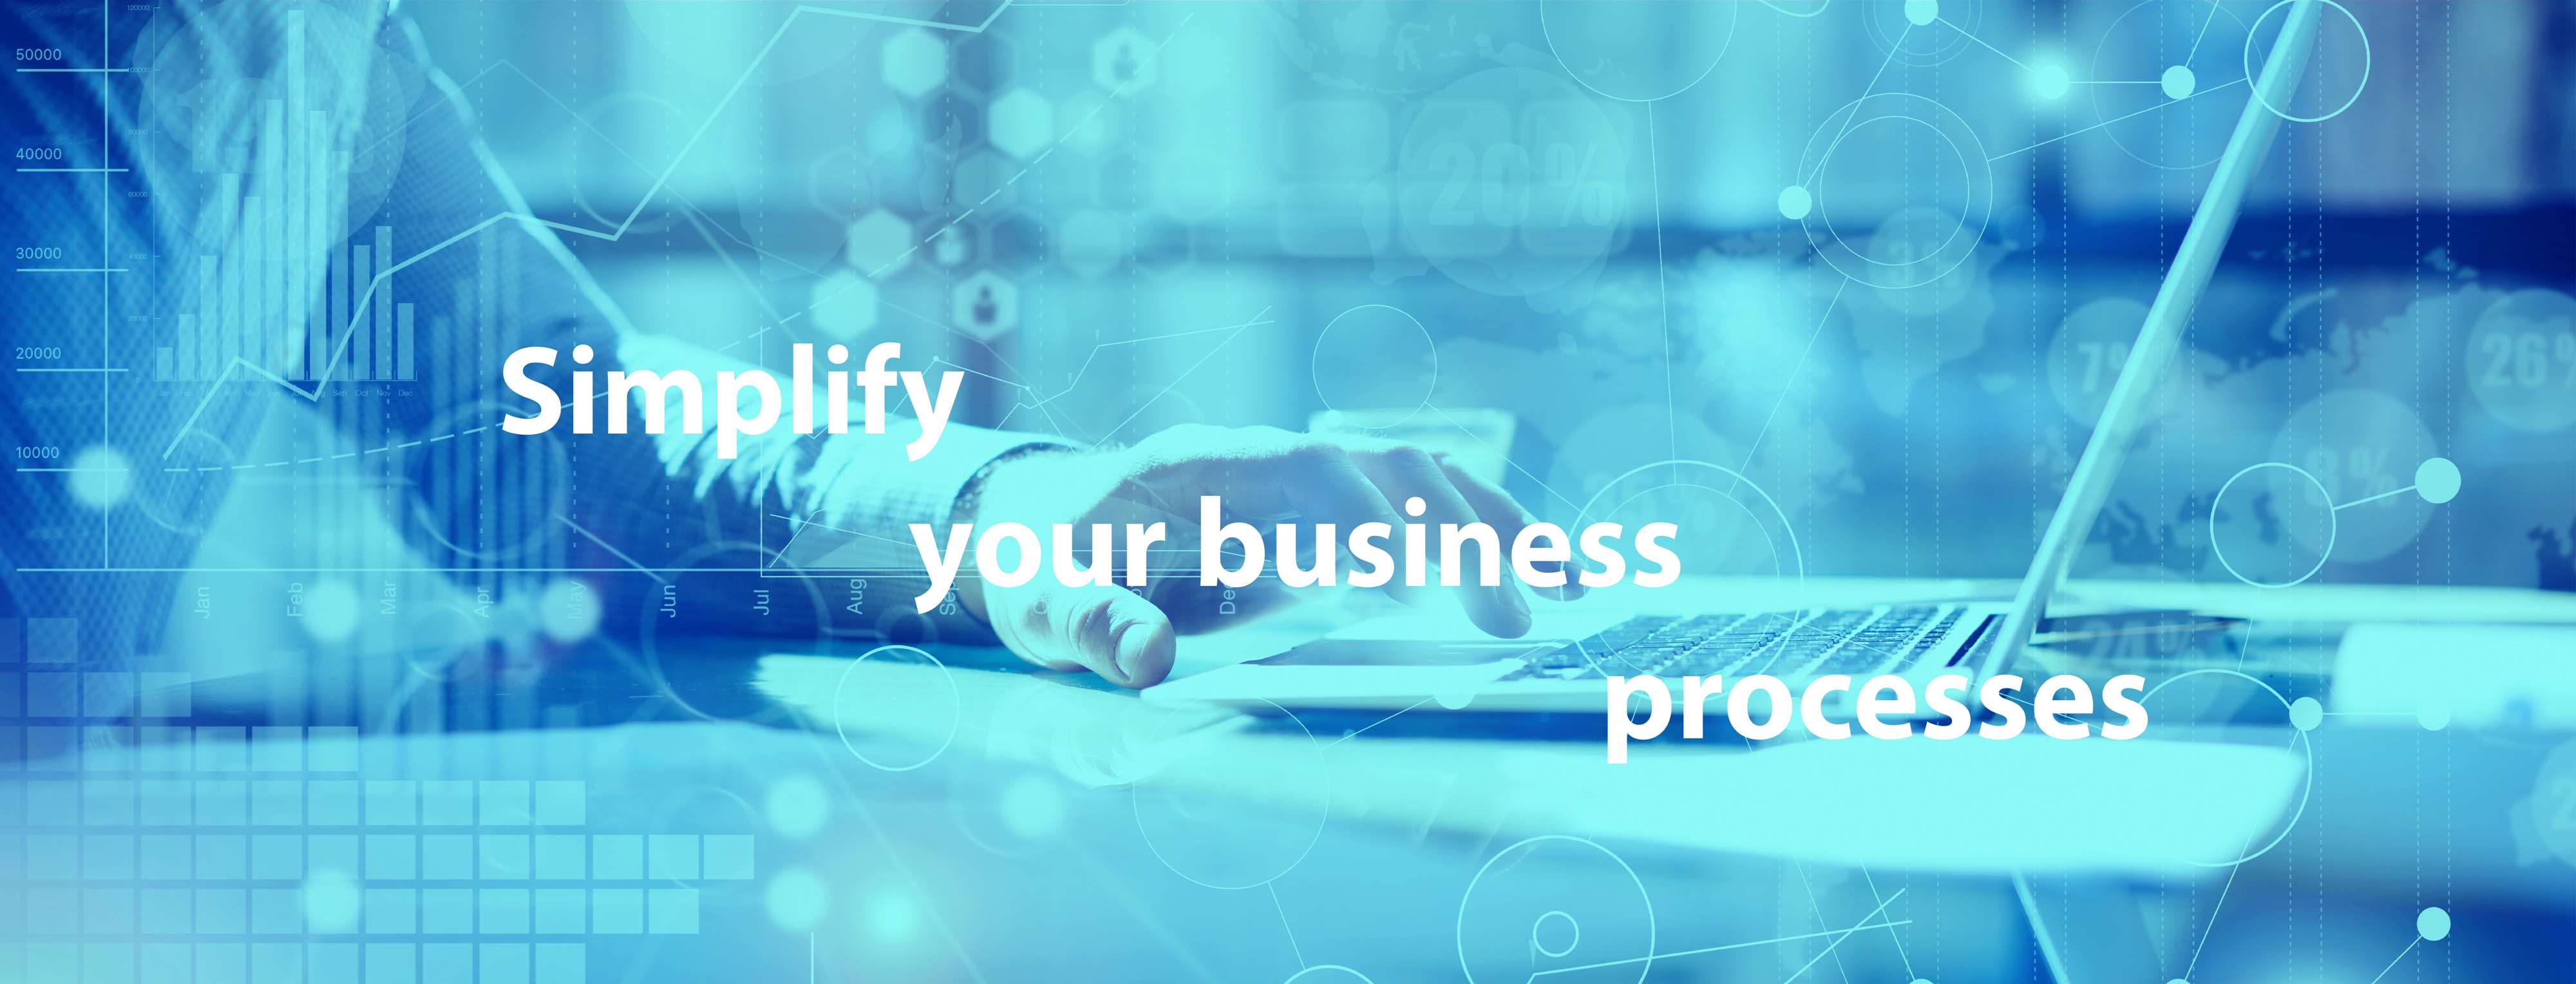 Simplify your business processes